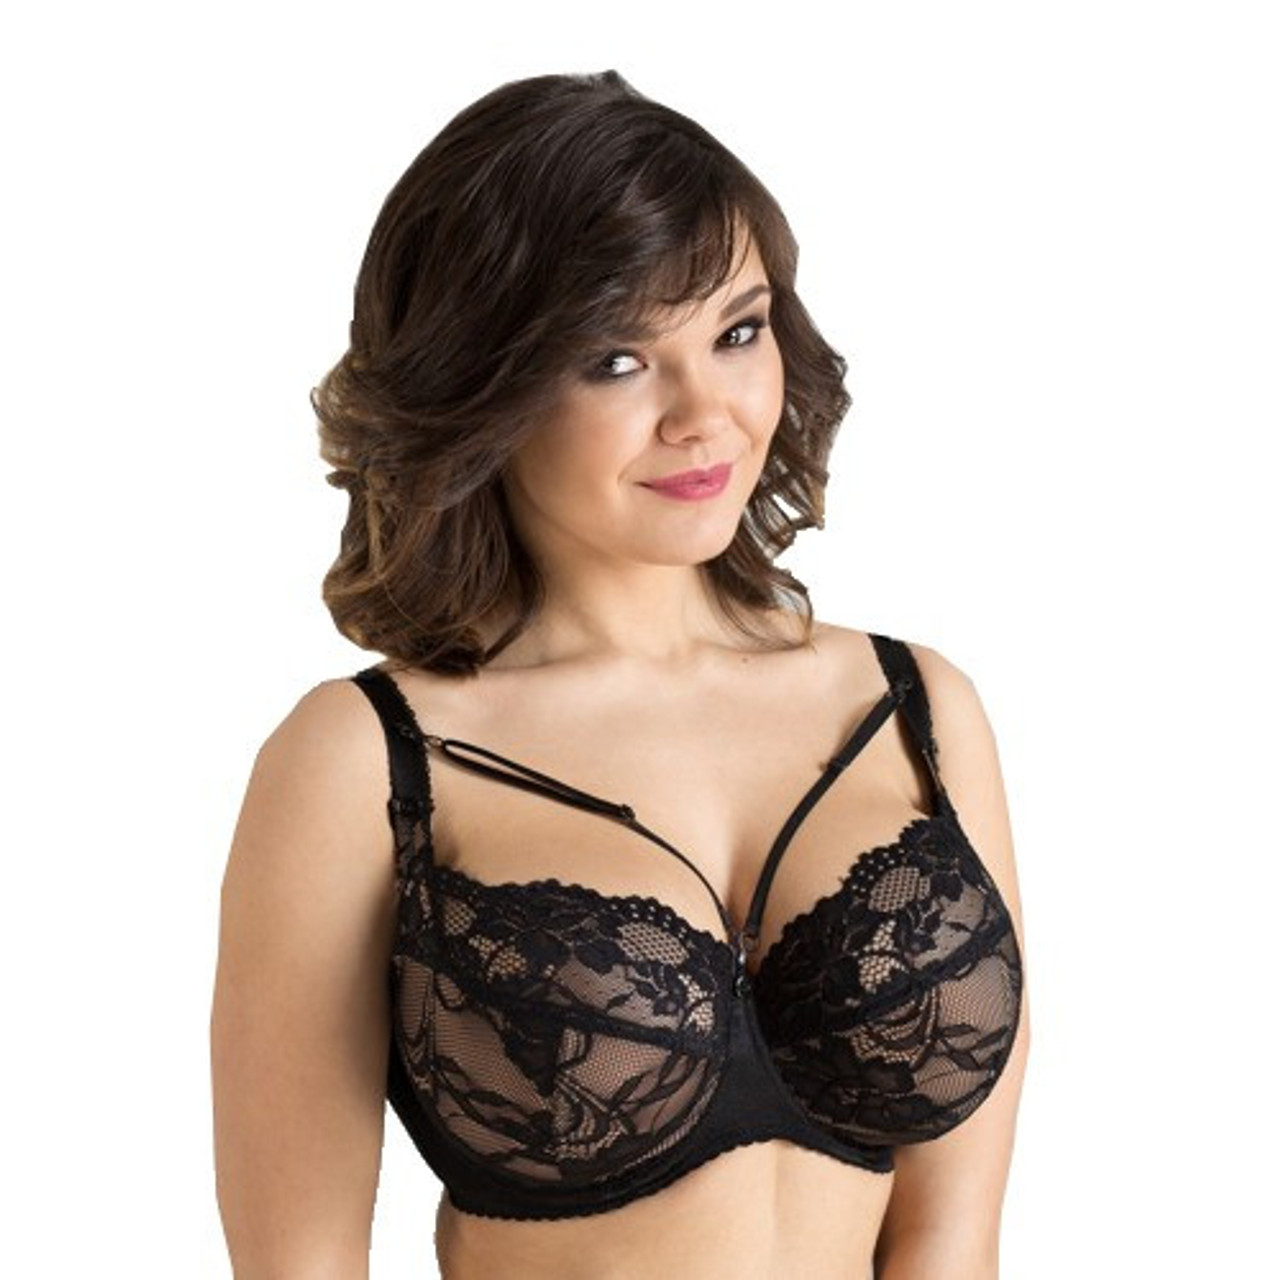 Shop Size 80C at Young Hearts Lingerie